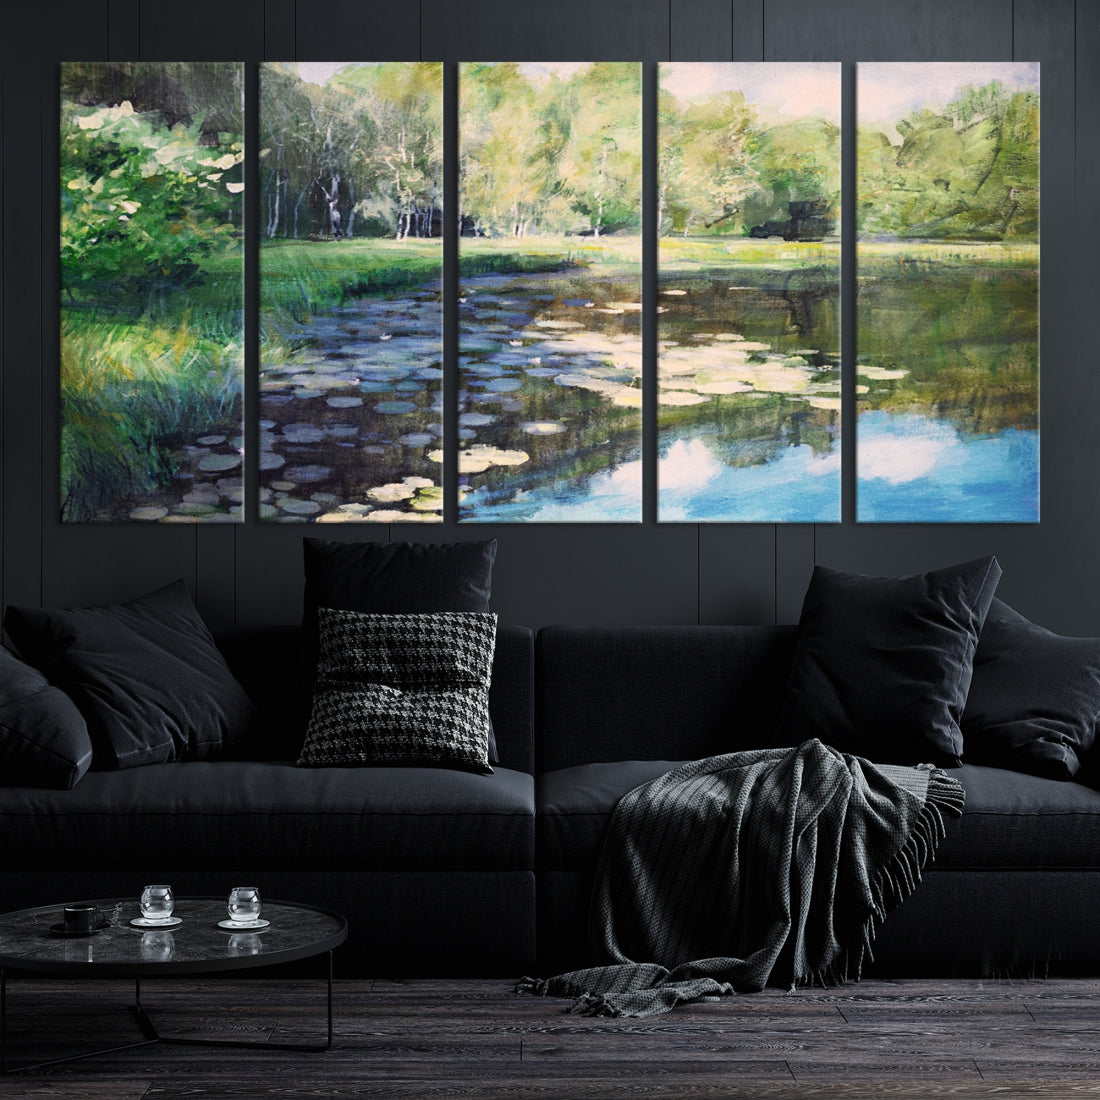 Forest Pond River Lake Extra Large Wall Art Canvas Print